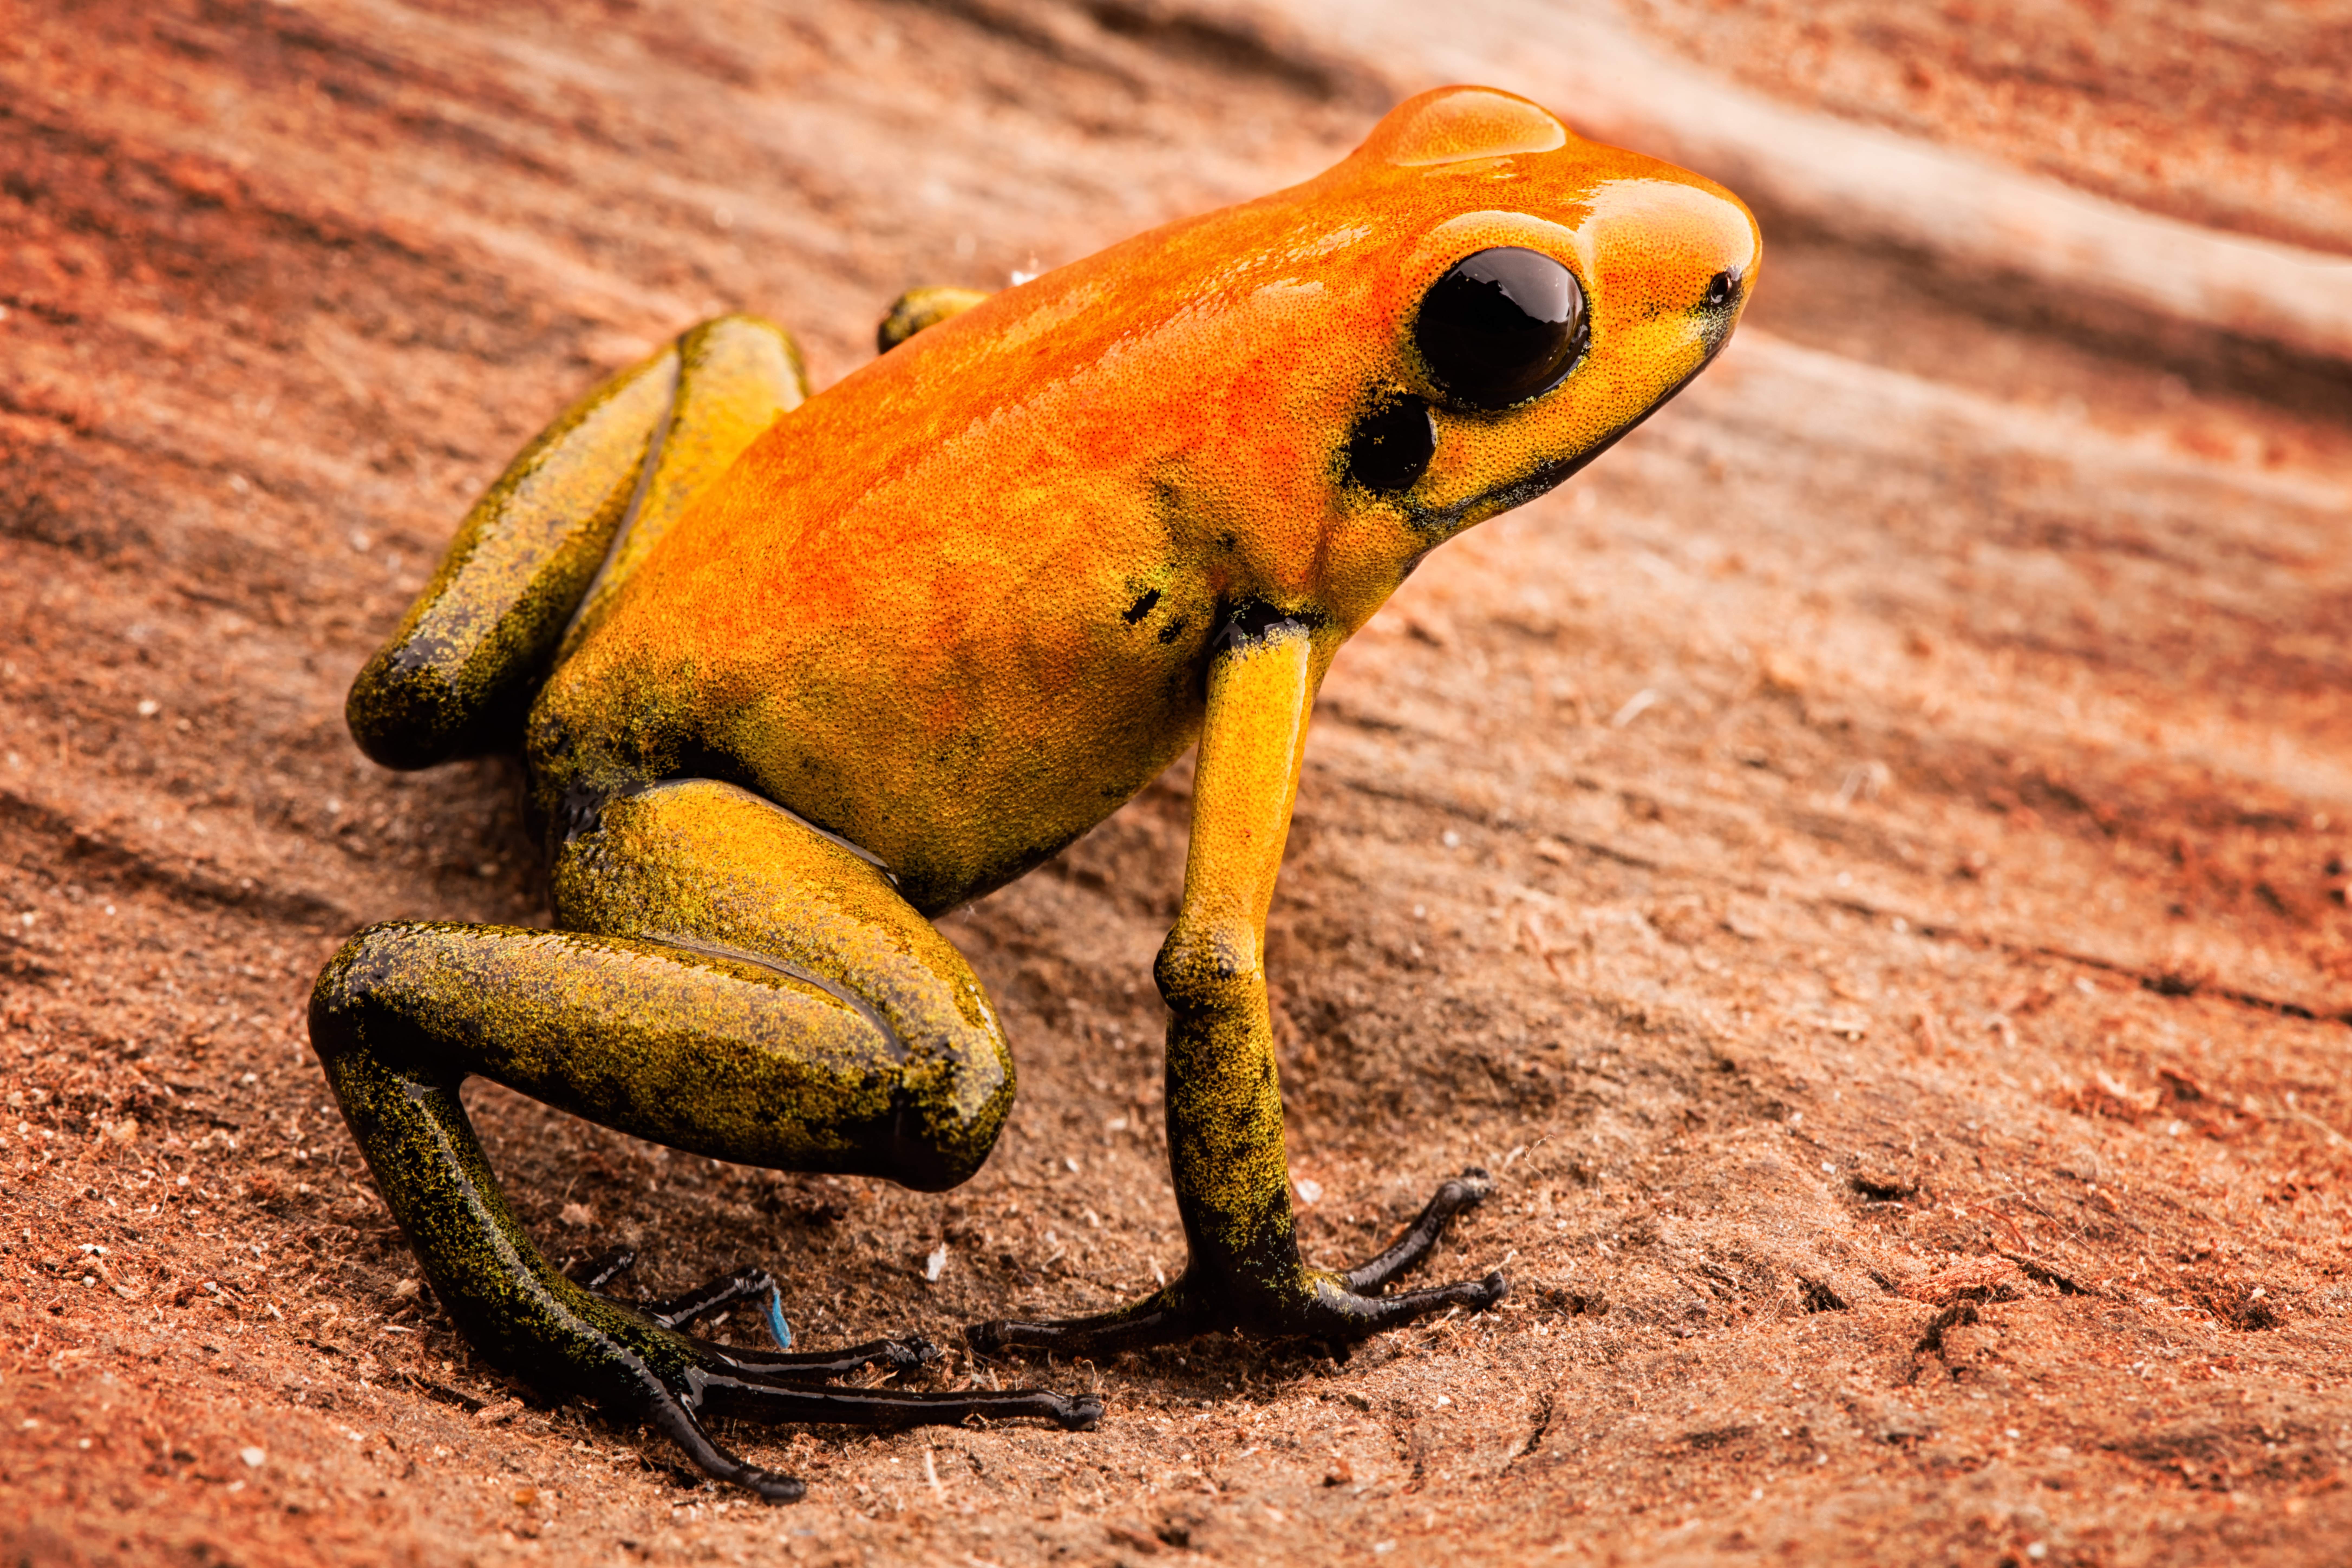 Phyllobates bicolor looks confusingly similar to the golden poison frog and is closely related to it. It too has been used to poison blowpipe darts. However, it contains batrachotoxin in much lower concentrations than its terrible relative. | Dirk Ercken/Shutterstock.com